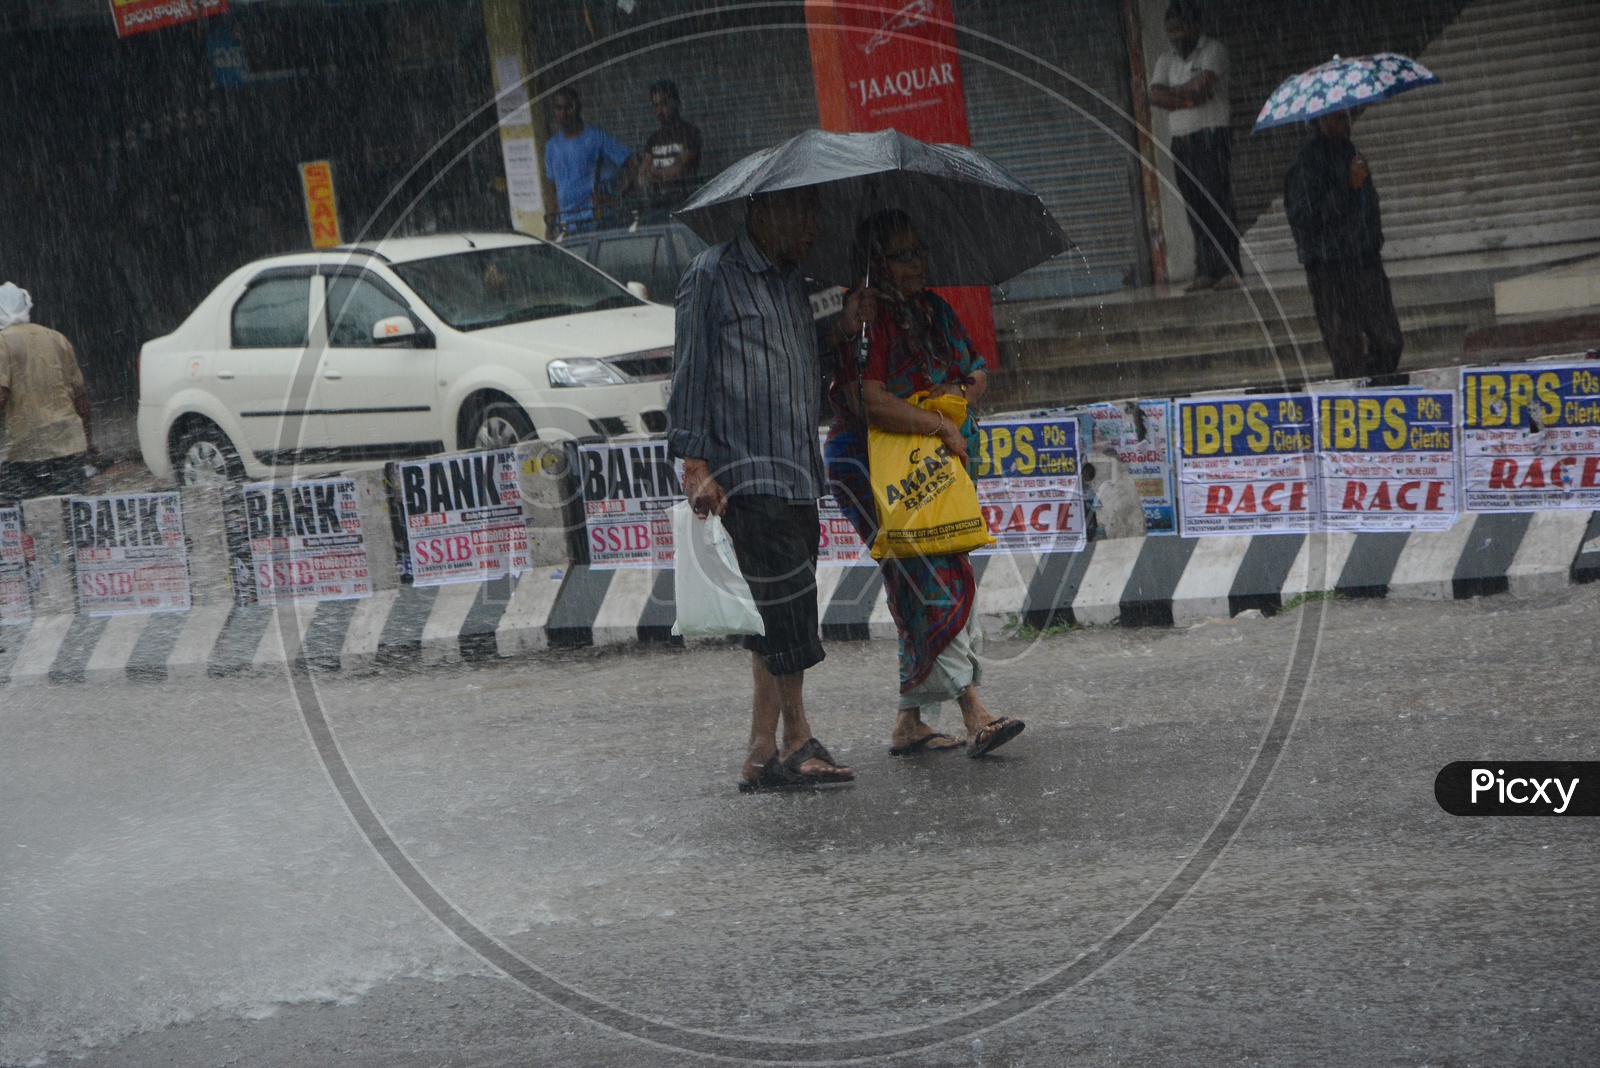 Pedestrians Drenching in  Heavy Rains And Walking  with Umbrellas on Hyderabad City Roads